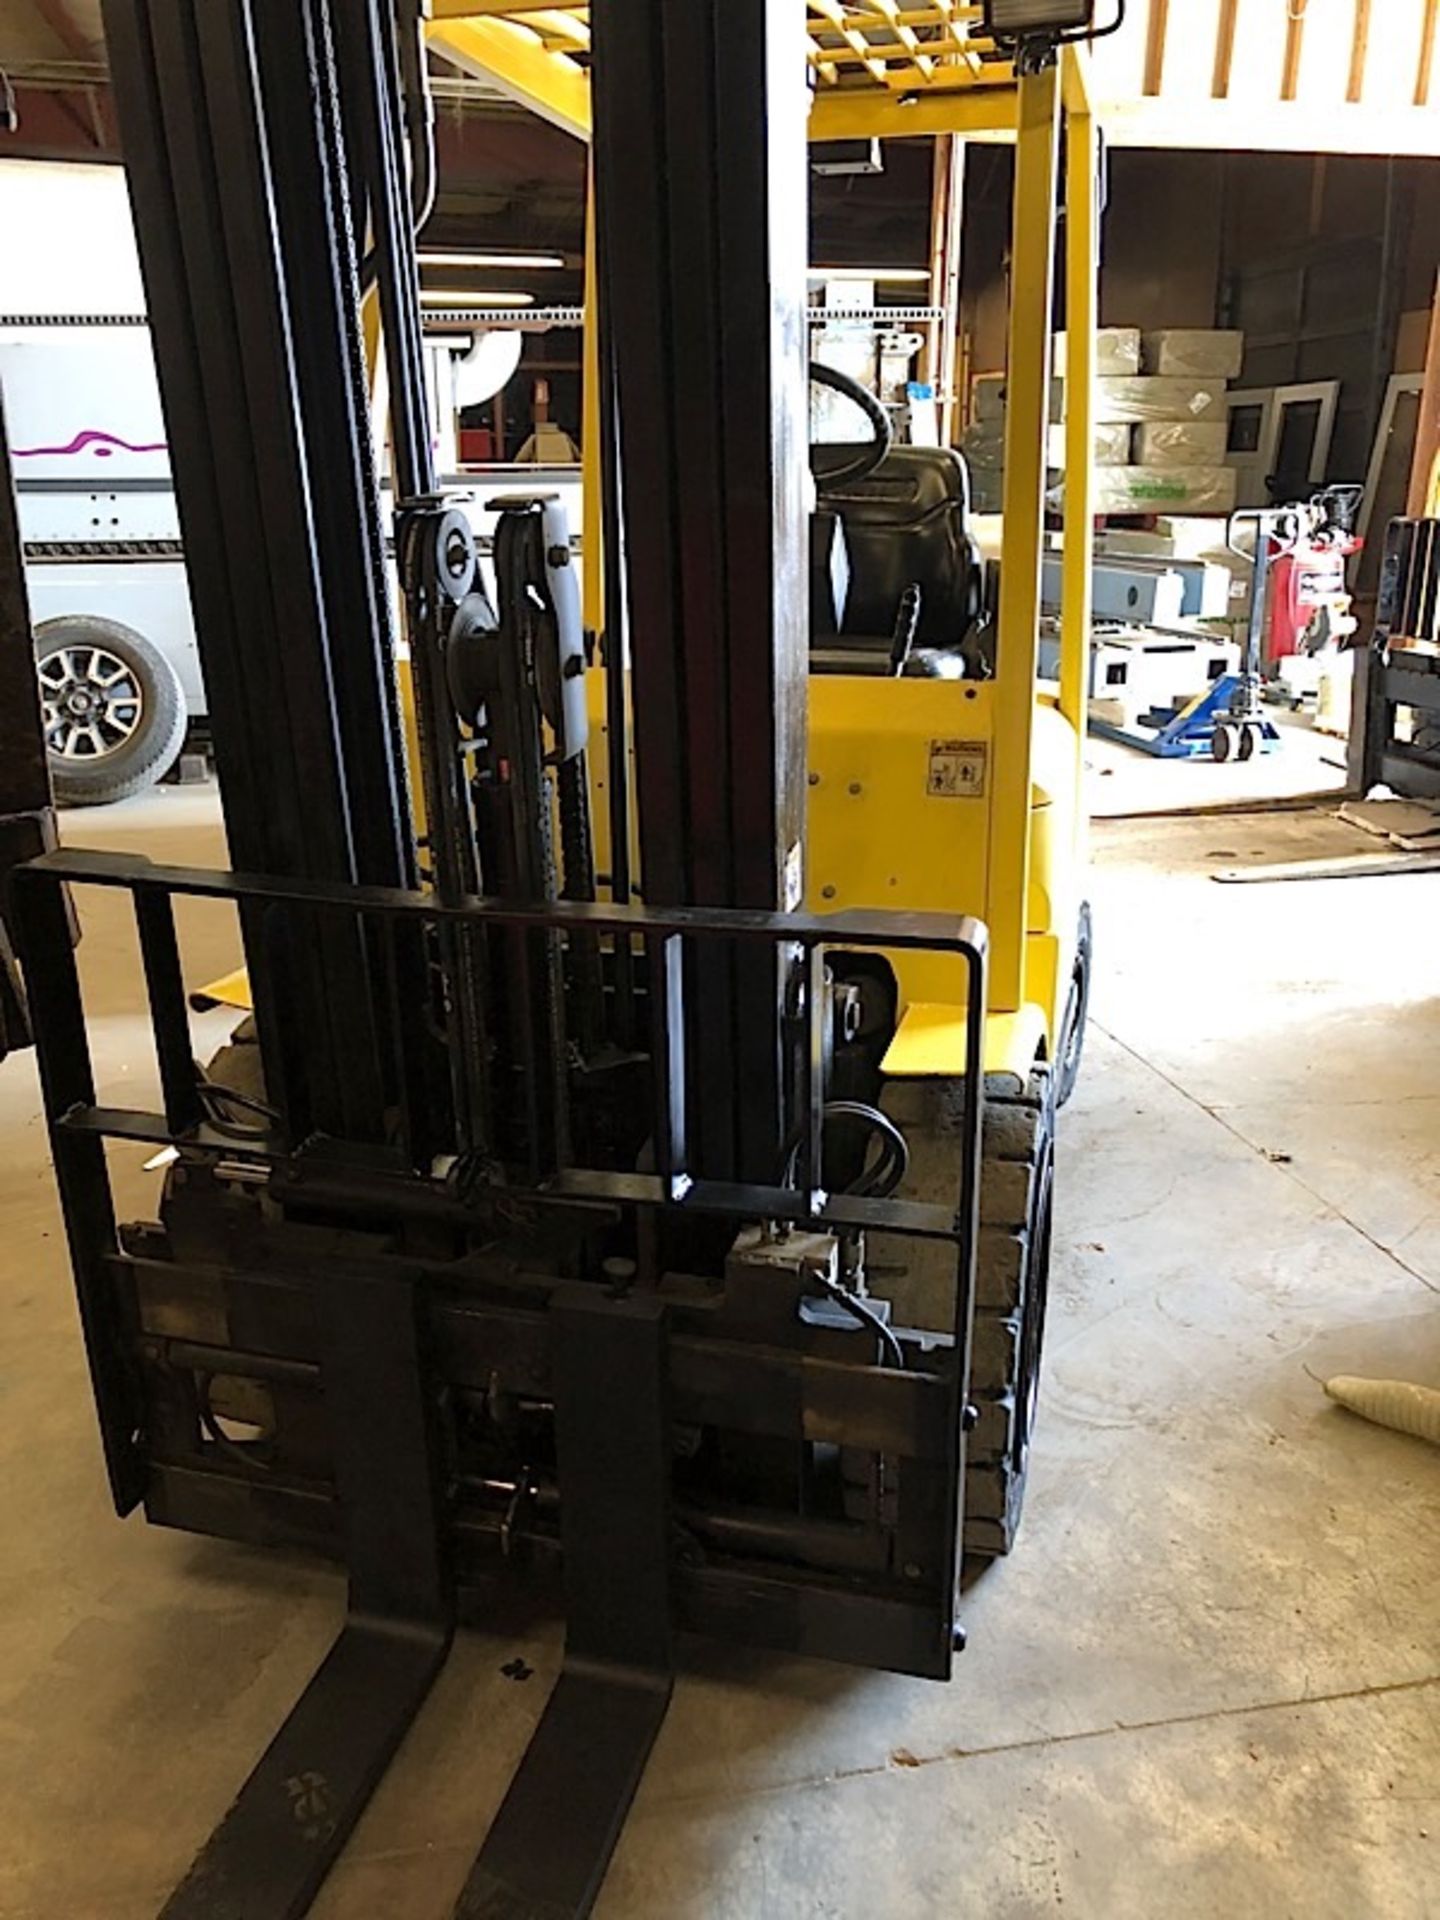 Hyster (S50XM) 5,000 lbs. cap Outdoor / Pneumatic Tire LPG Forklift - Image 3 of 4